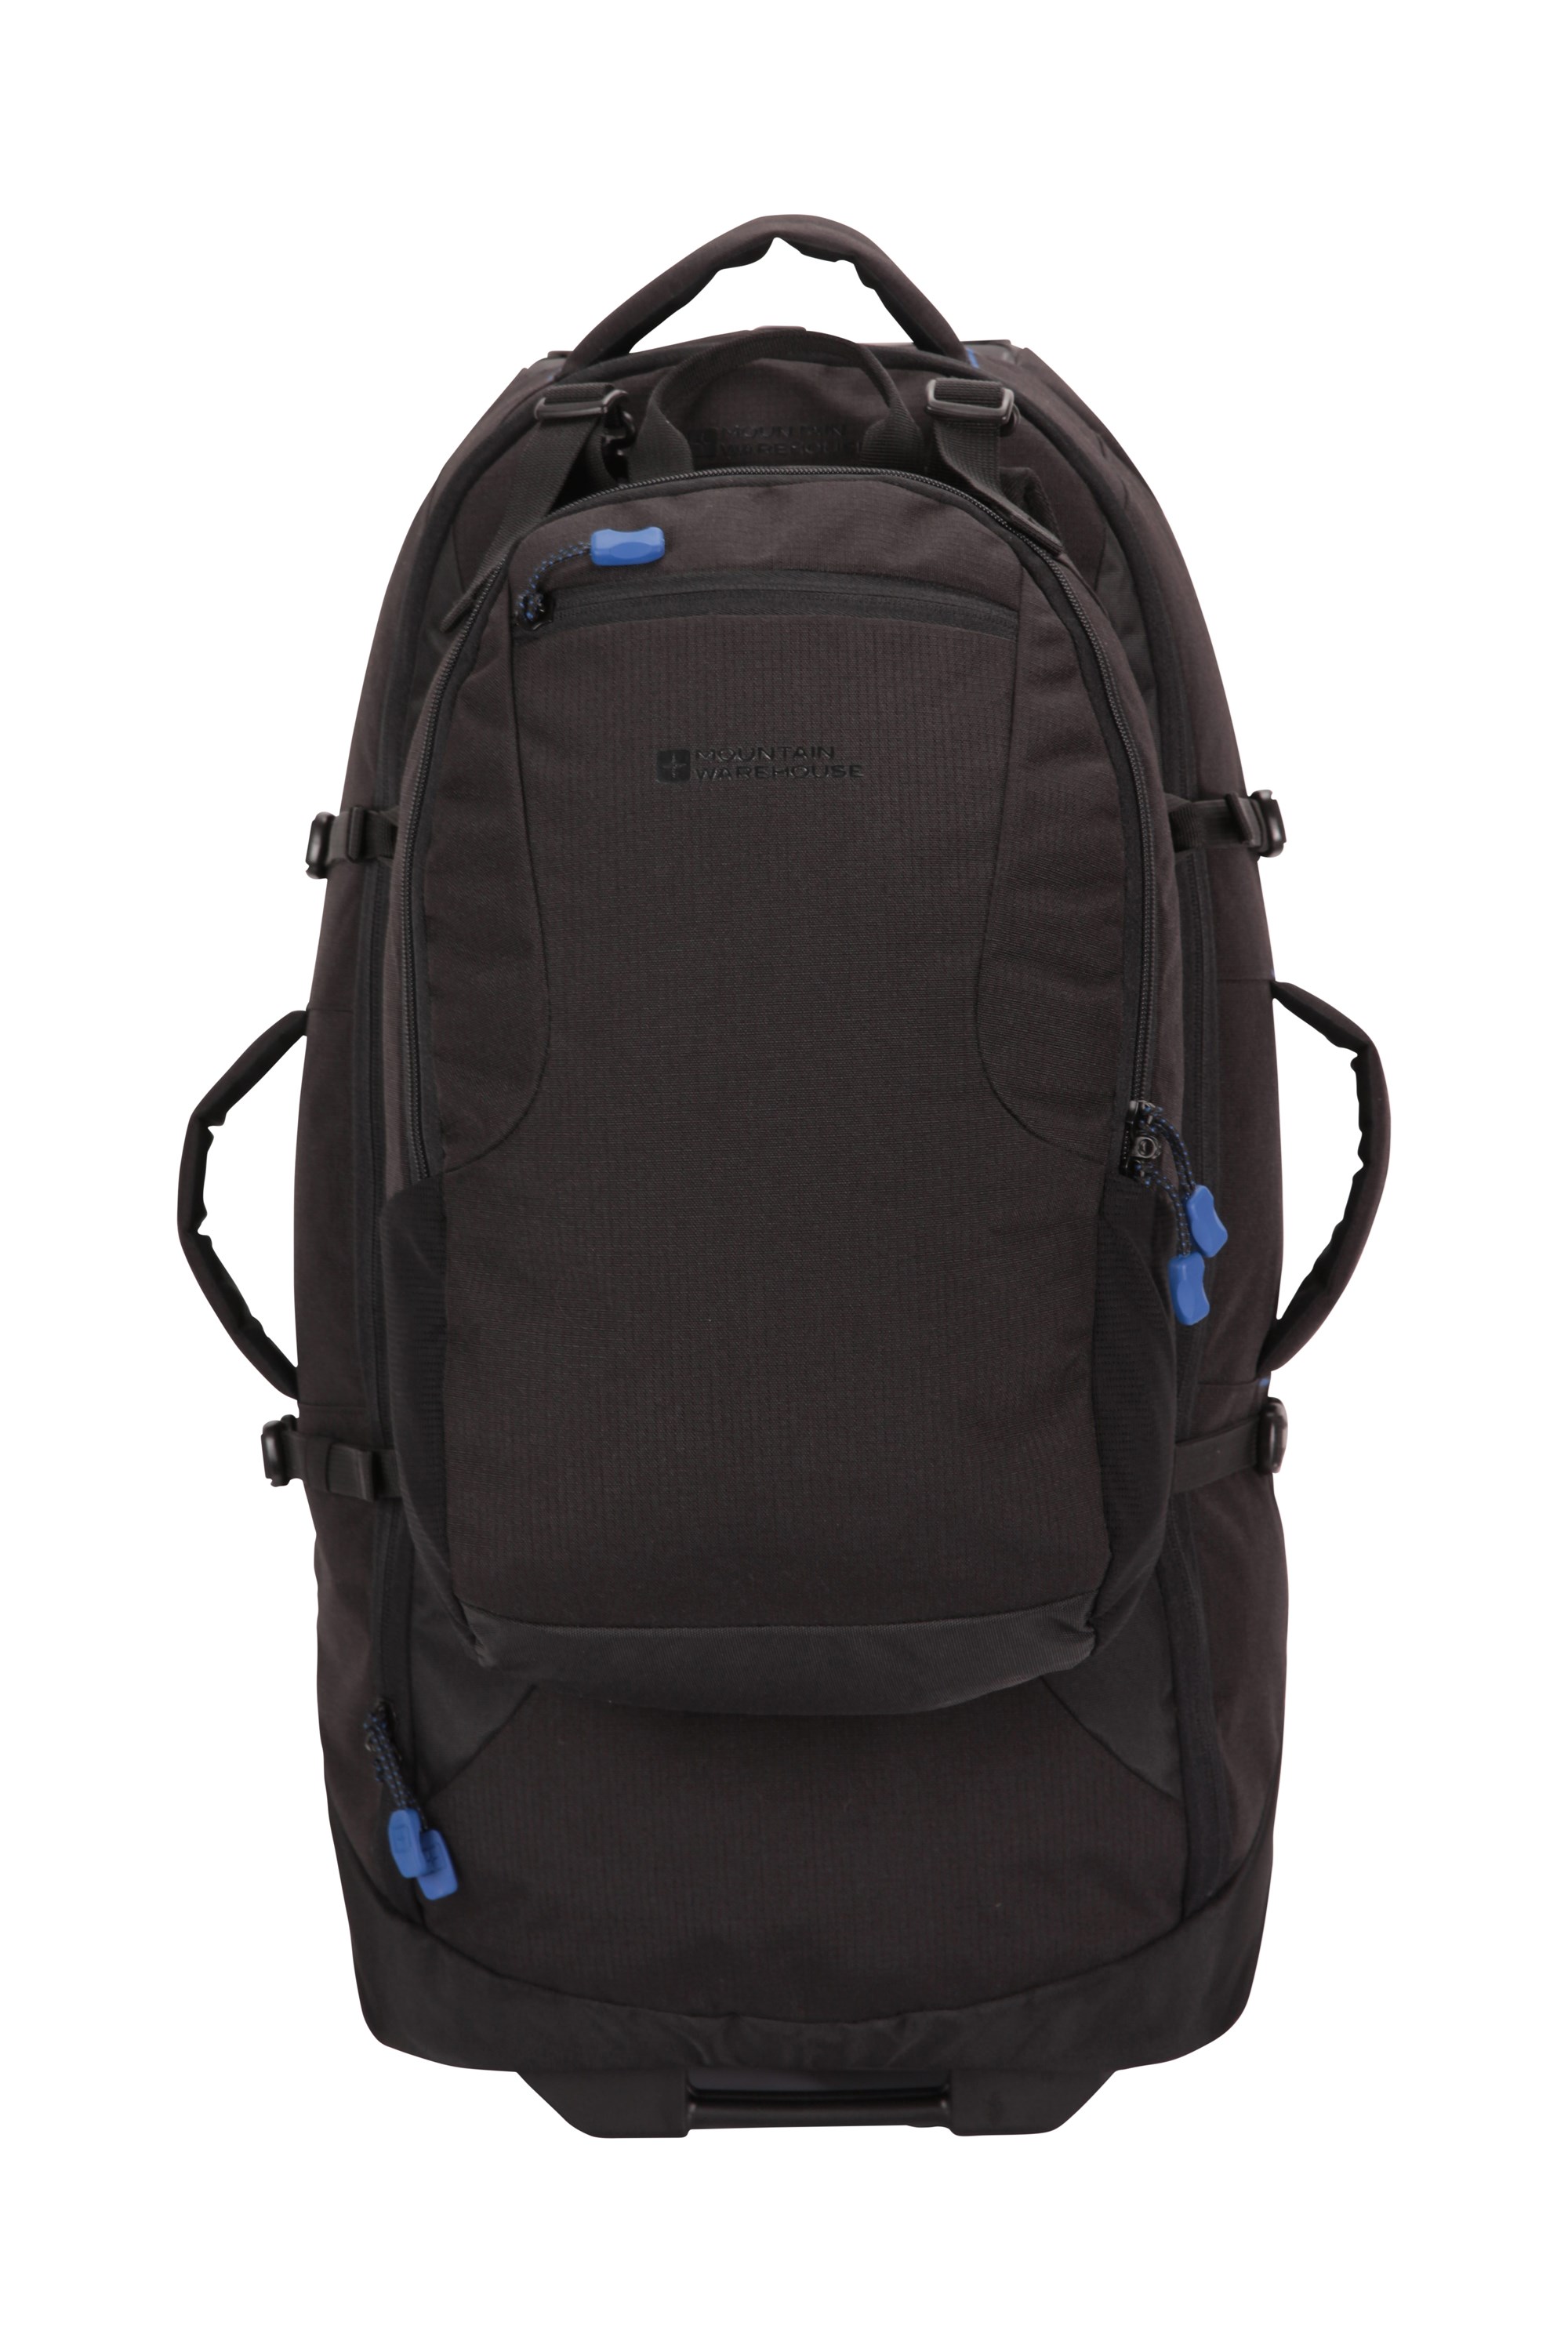 Mountain Warehouse Voyager Wheelie 50 20 Litre Backpack Charcoal